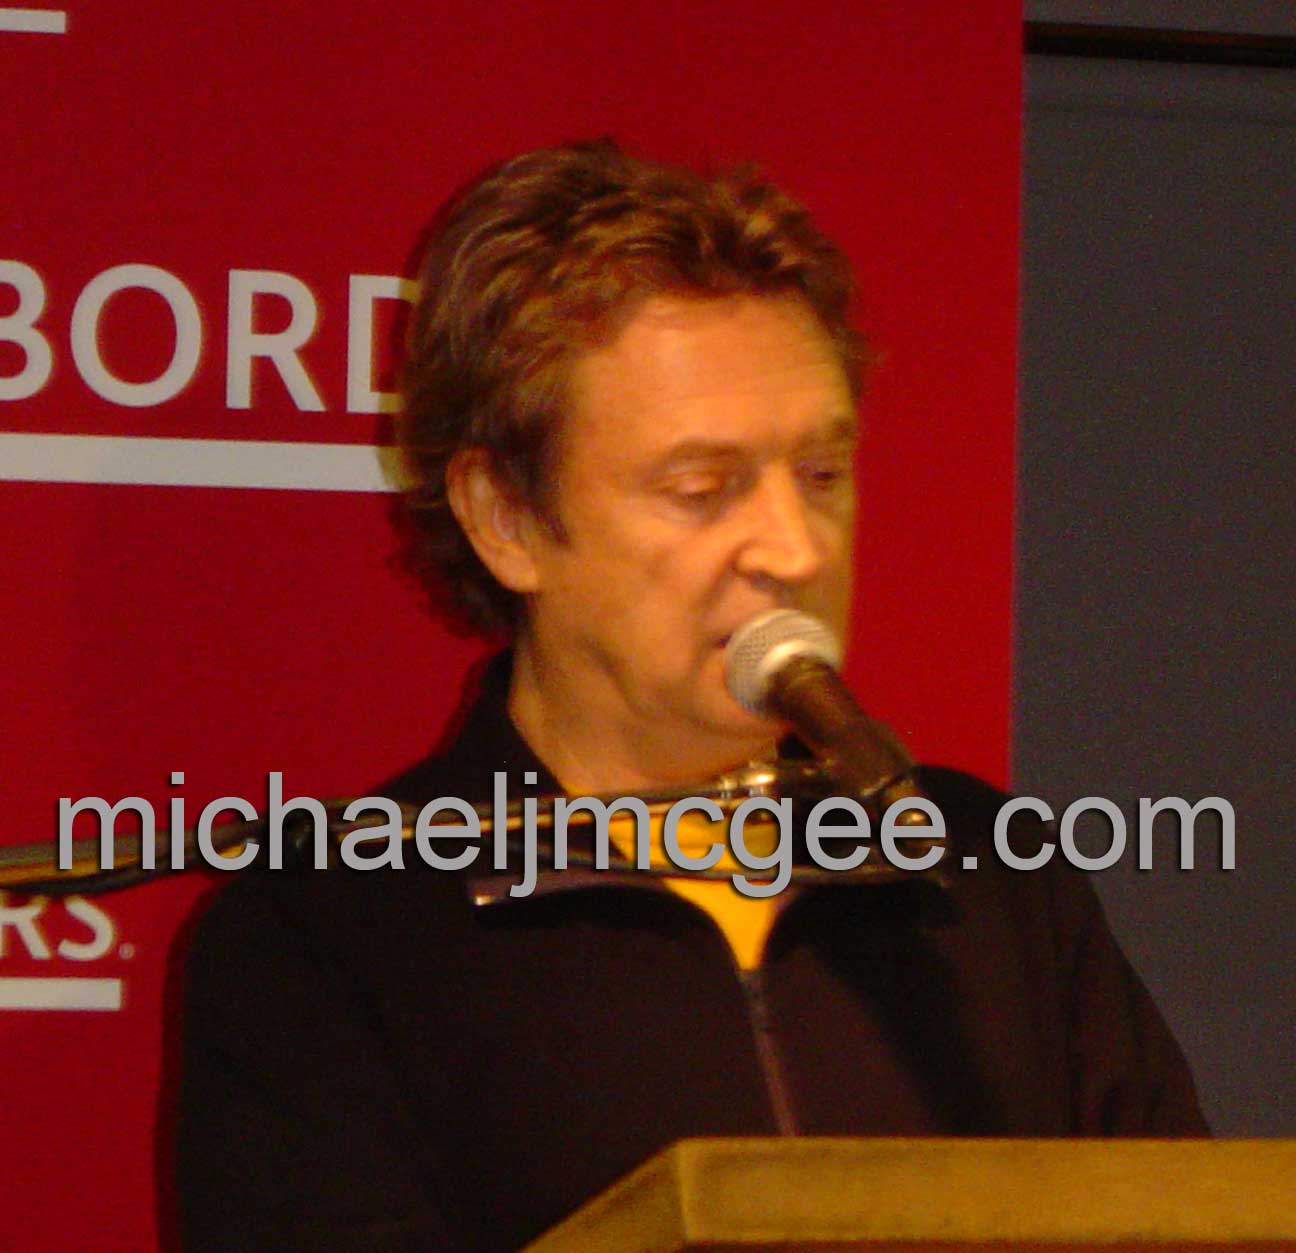 Andy Summers / michaeljmcgee.com